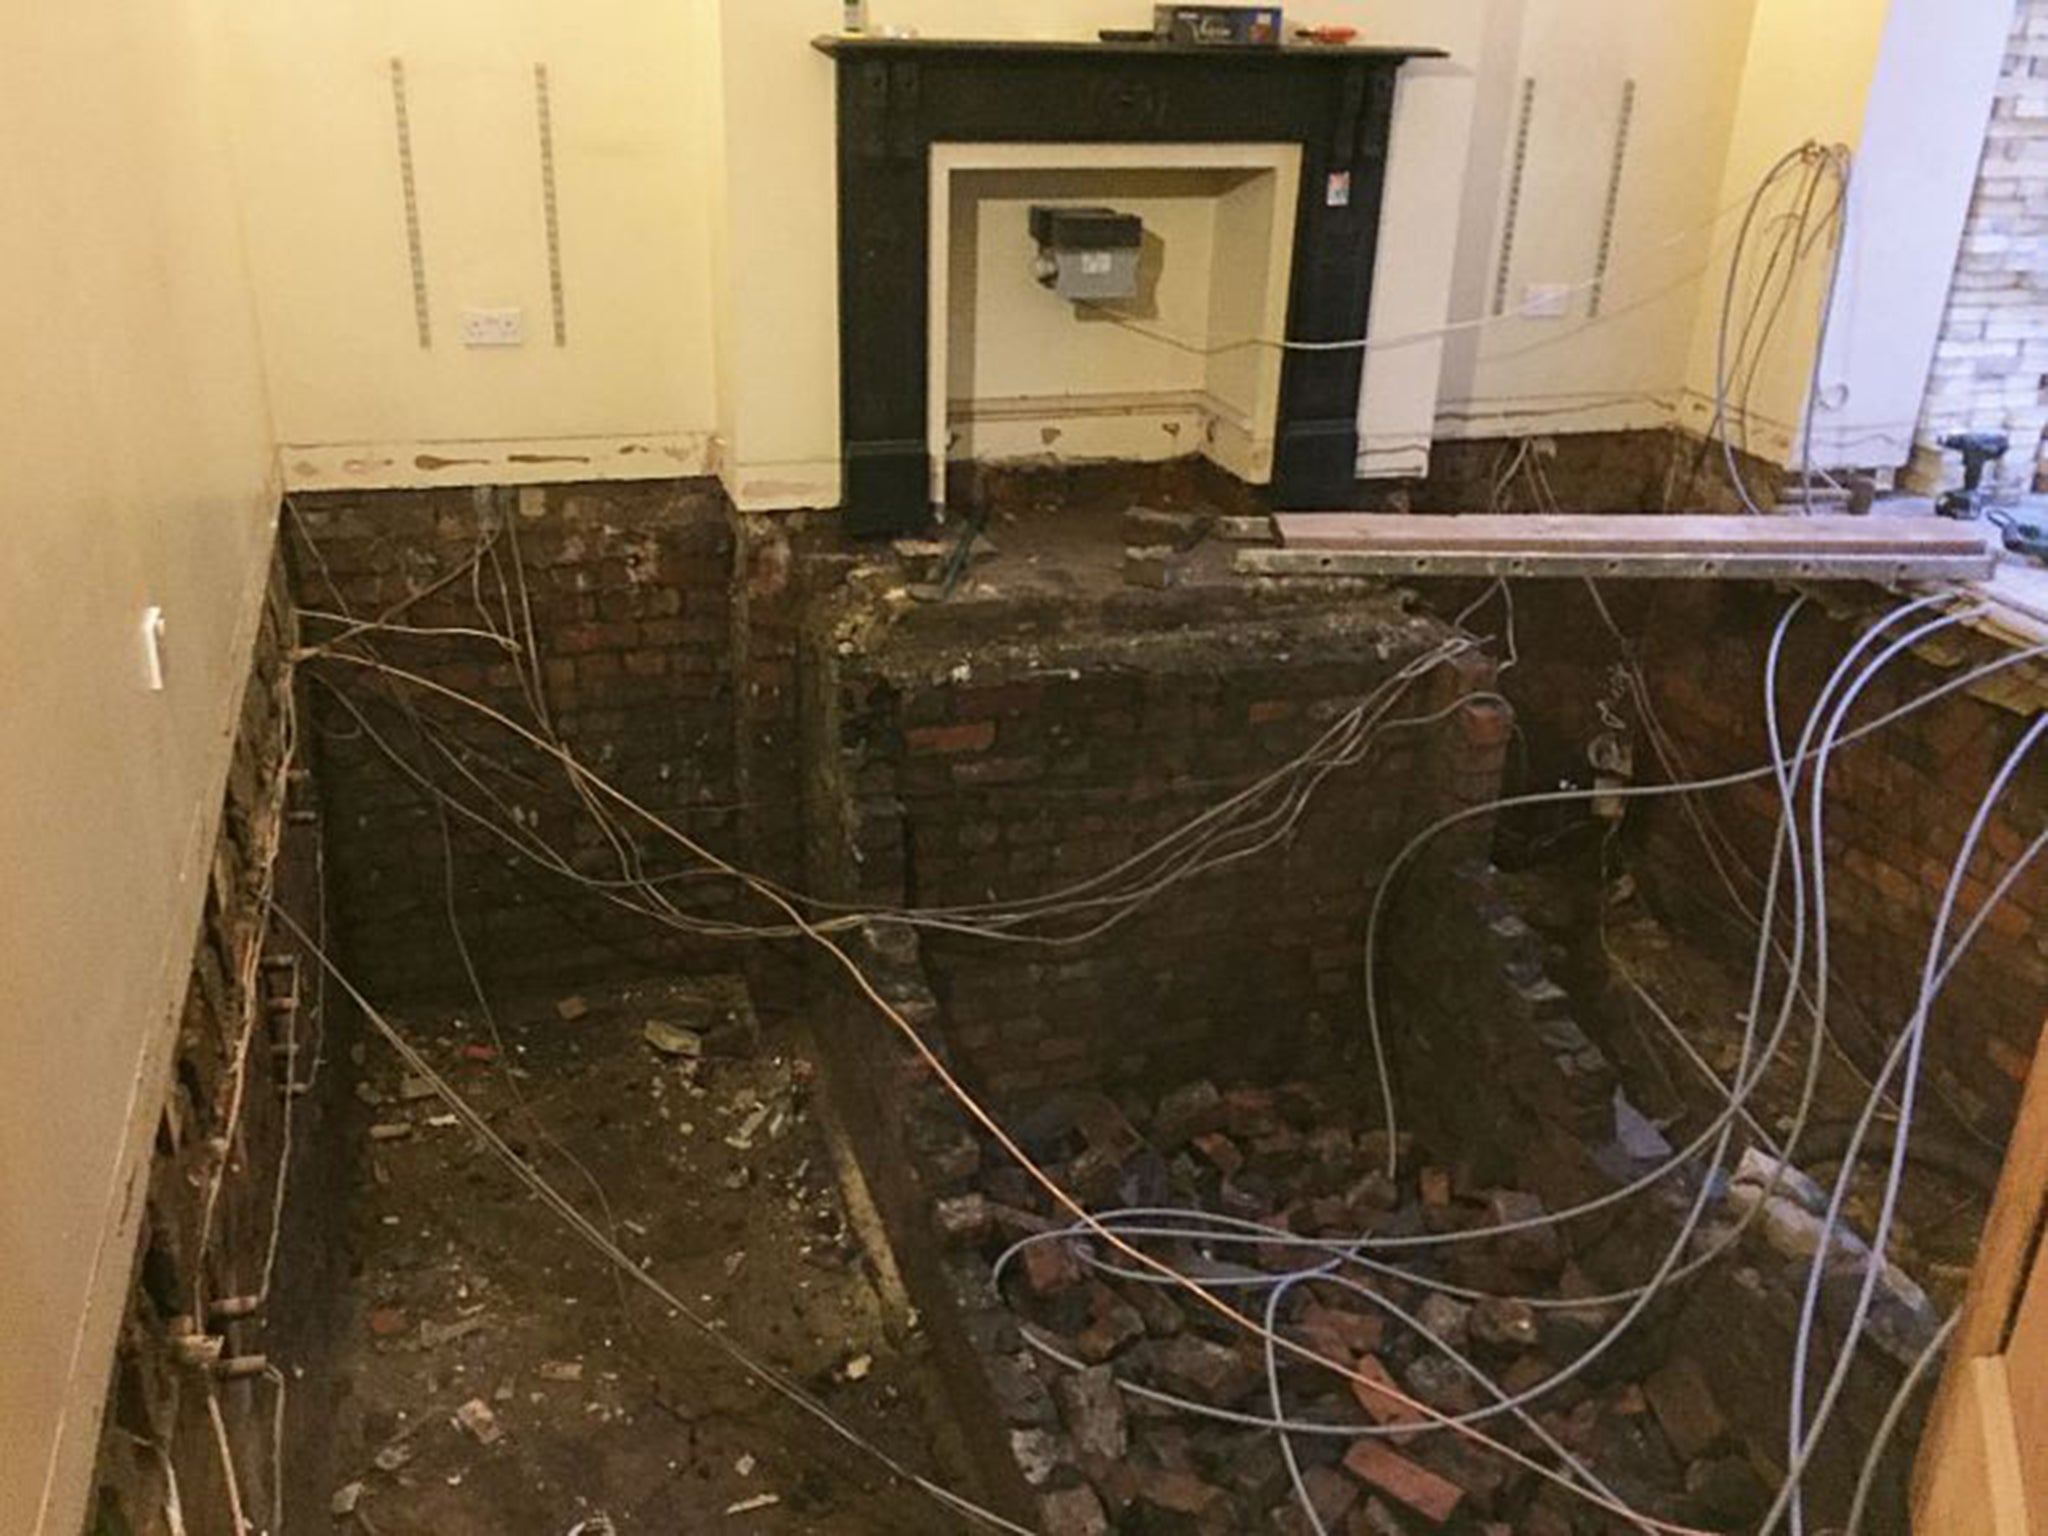 The interior of the house belonging to Cumbrian residents Campbell and Julie Hannah, ruined in the floods